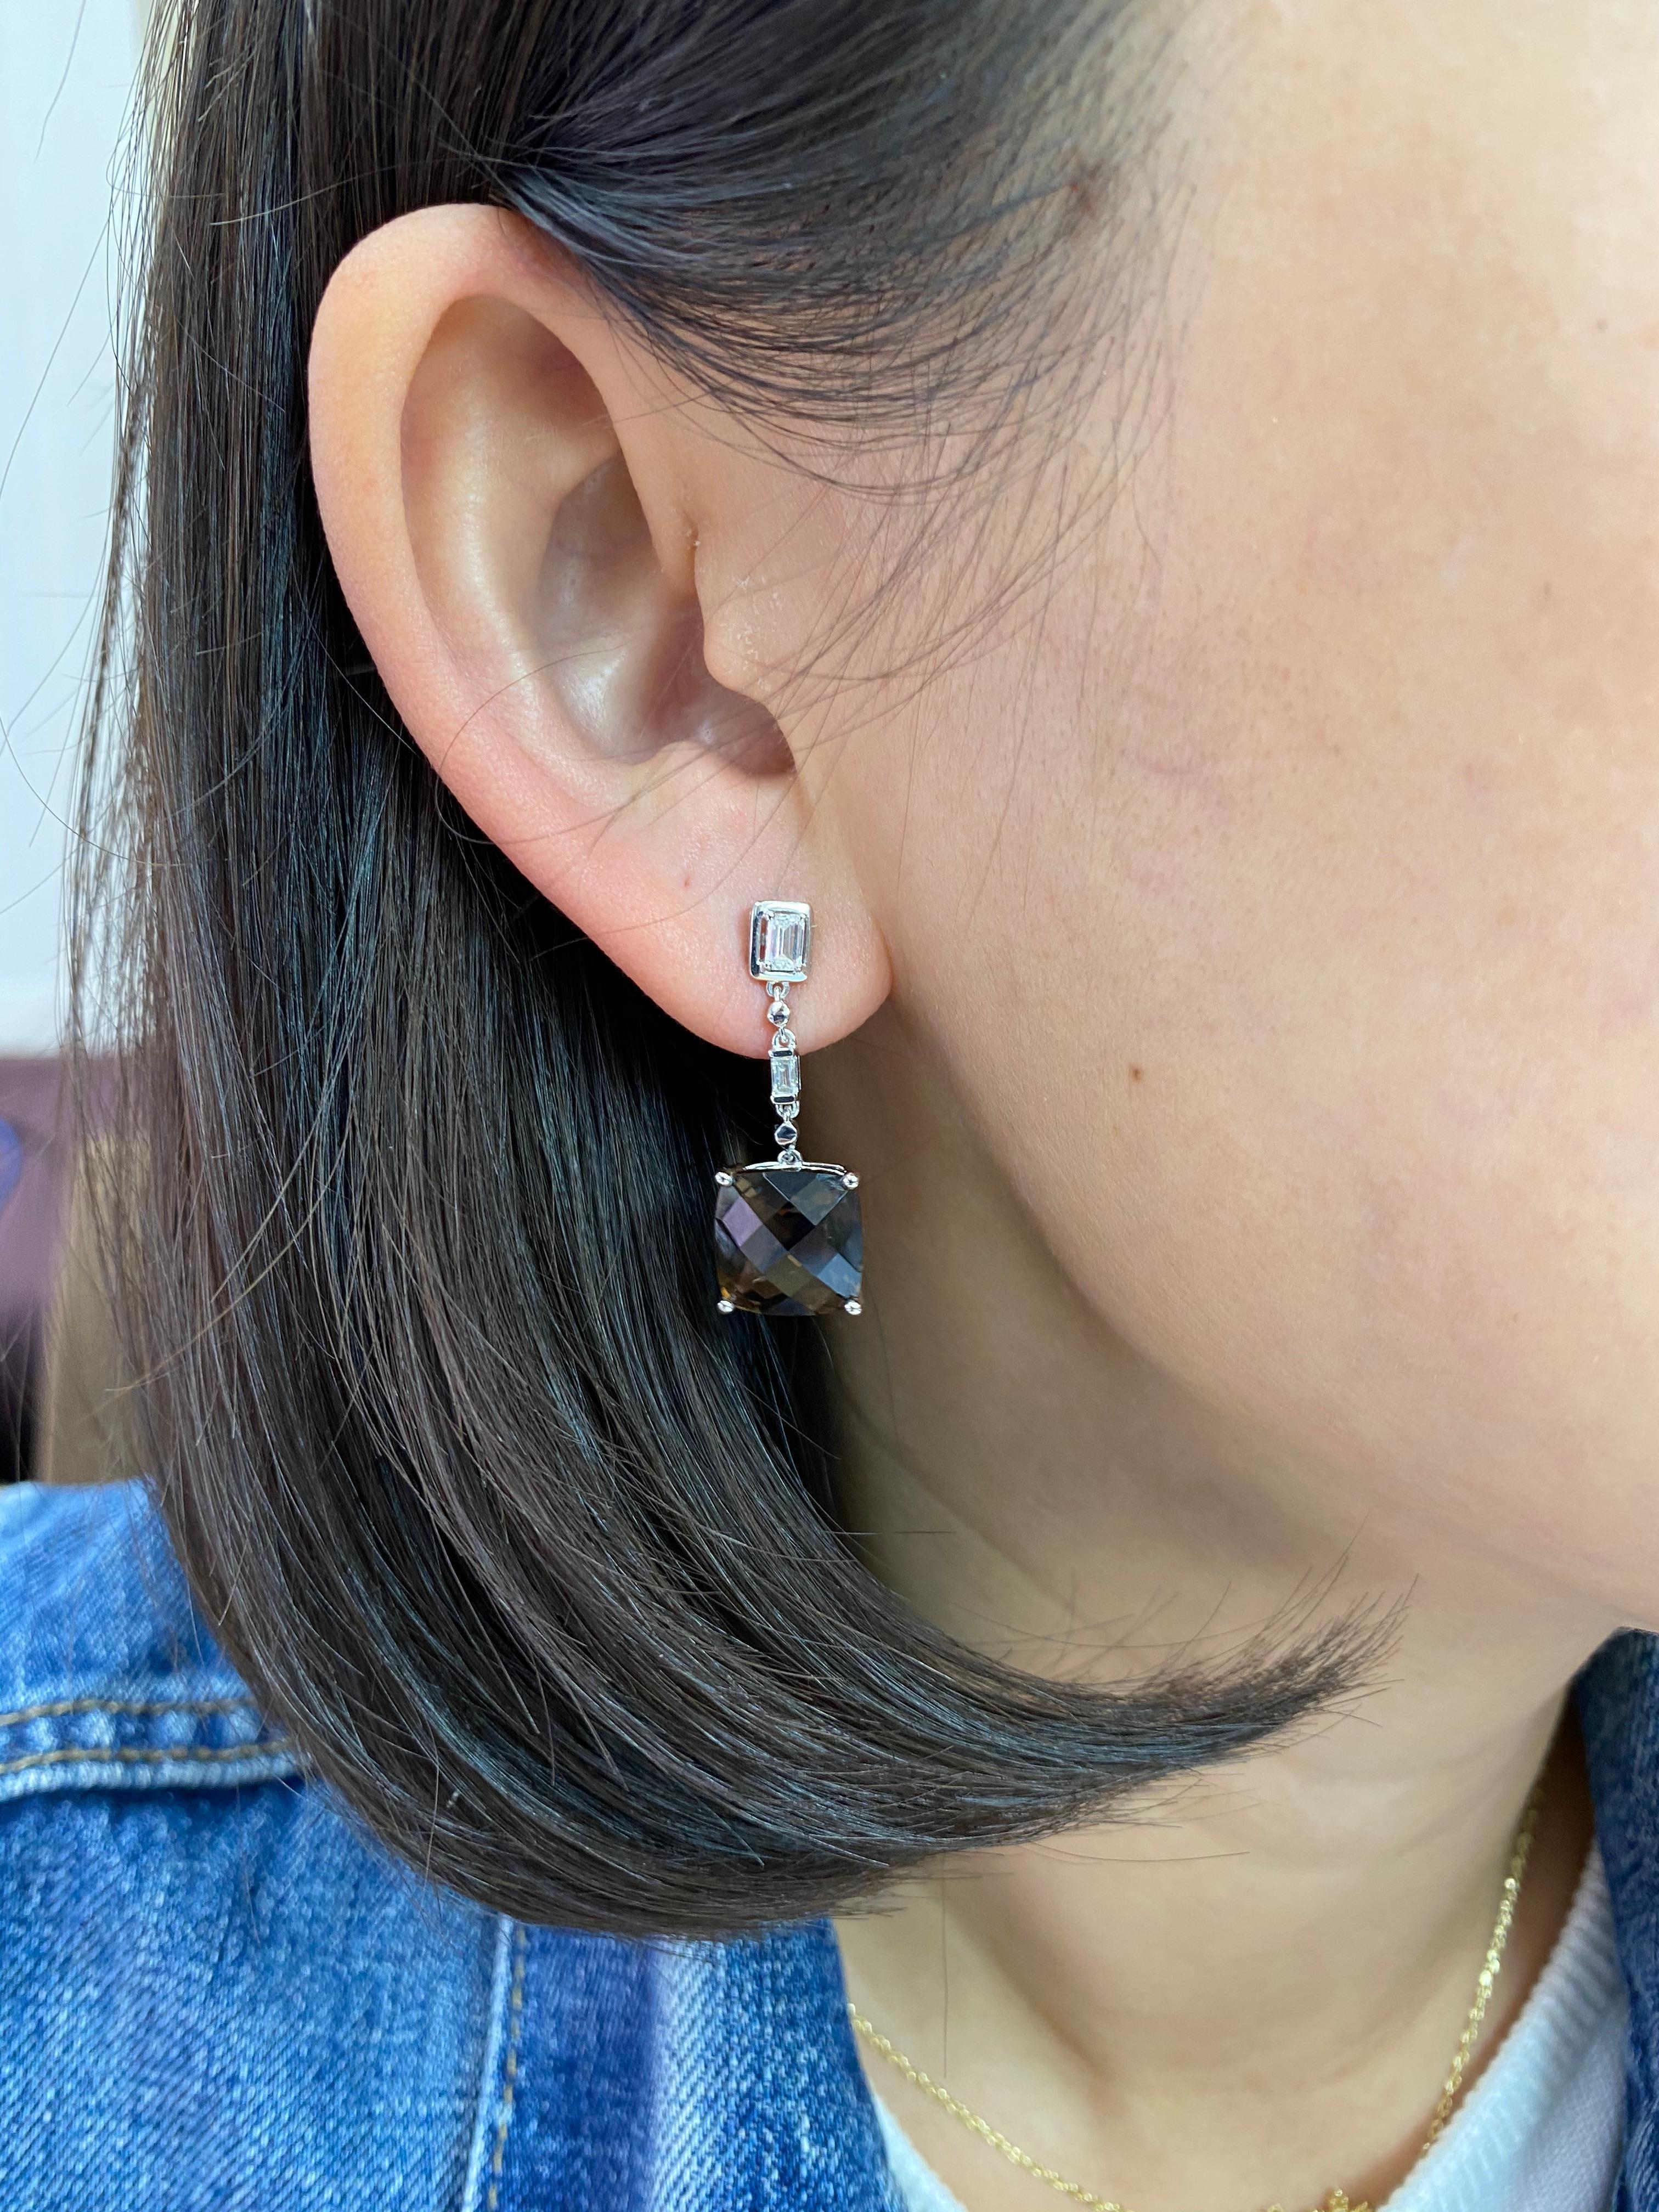 Here is a fantastic pair of drop earrings. The earrings are set in 18k white gold. The two nicely faceted smoky quartz are 10 cts in total weight. There are 4 emerald step cut diamonds totaling 0.49cts that make up this pair of drop earrings. The